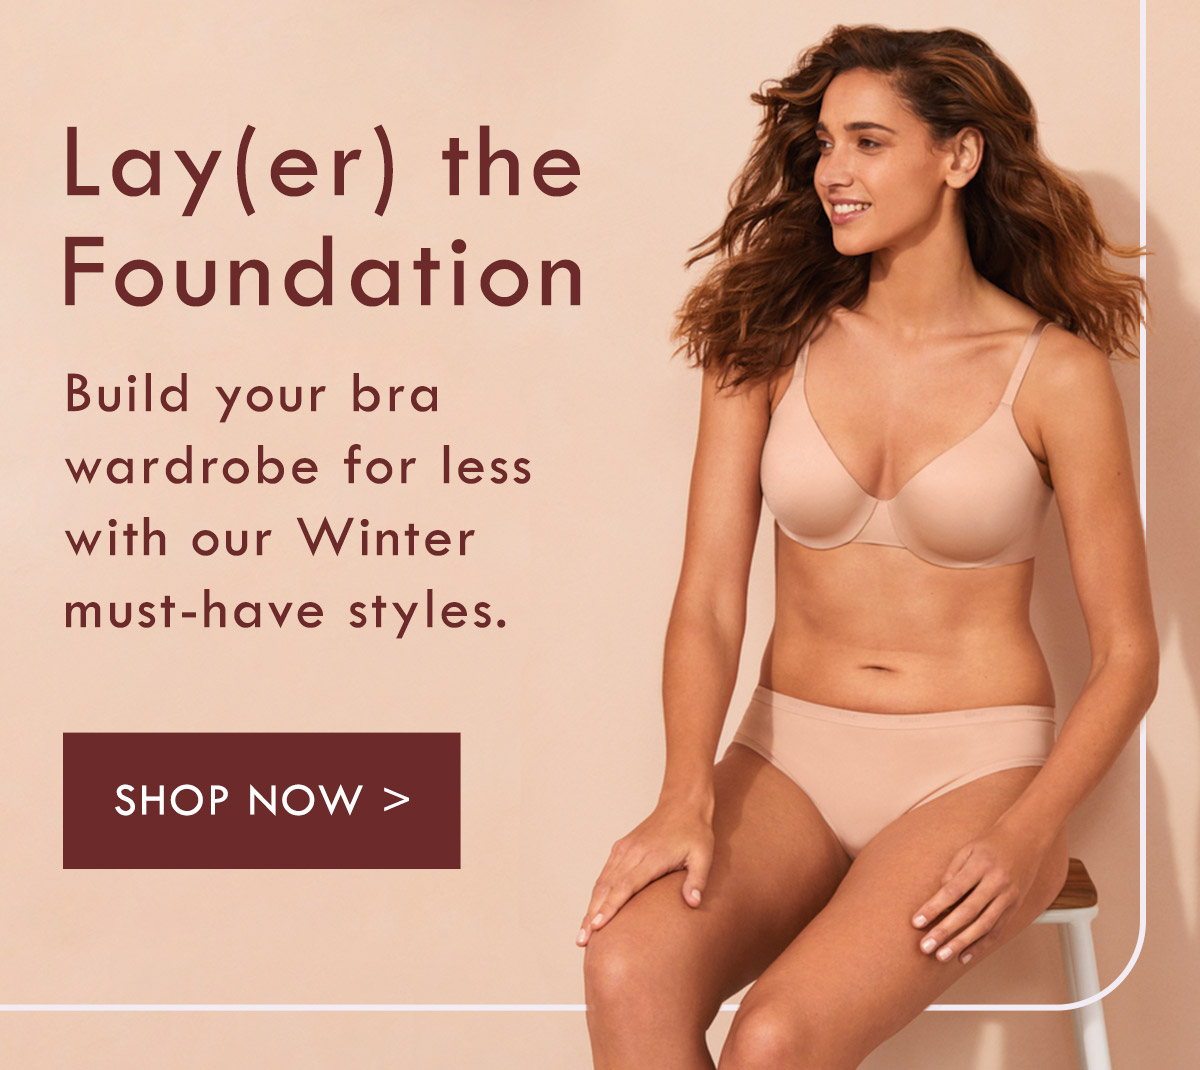 Berlei - Layer the Foundation. Build your bra wardrobe for less with out Winter must-have styles. Shop Now.